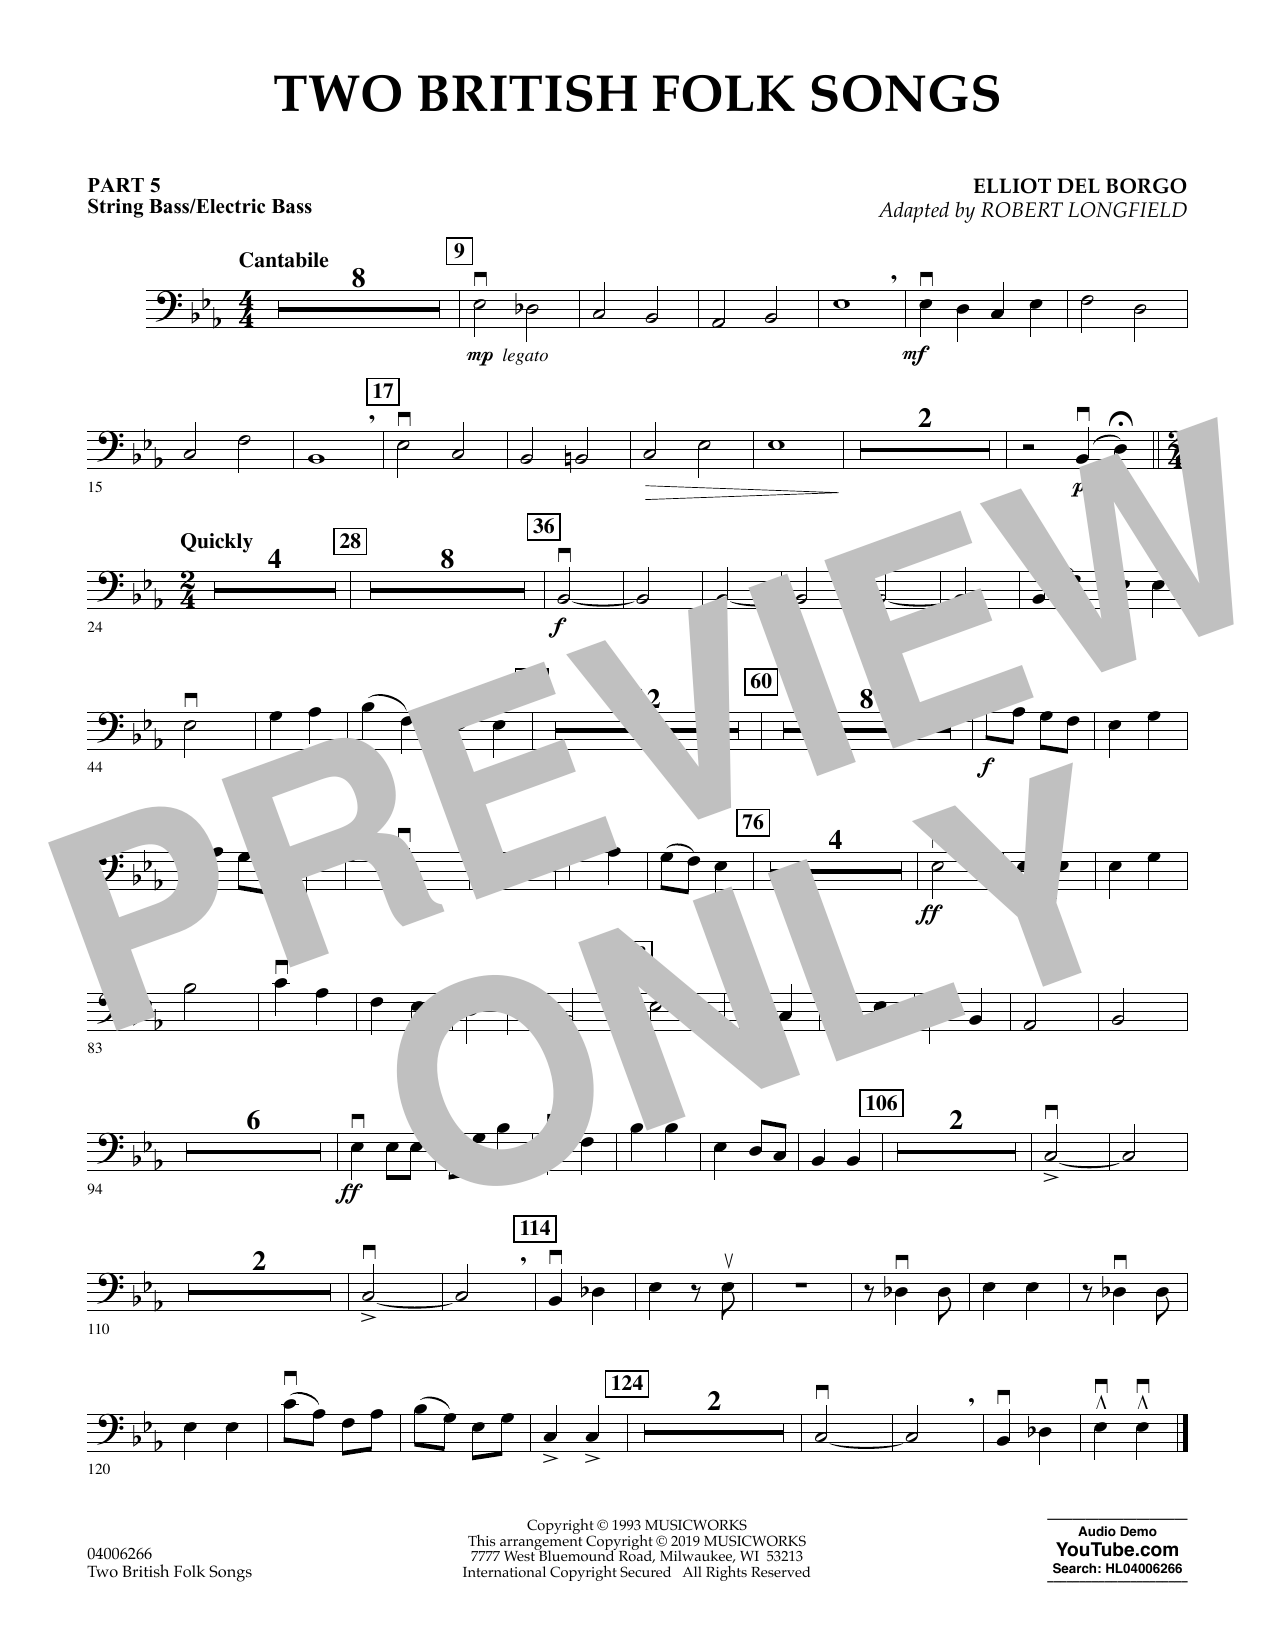 Elliot Del Borgo Two British Folk Songs (arr. Robert Longfield) - Pt.5 - String/Electric Bass sheet music preview music notes and score for Concert Band including 1 page(s)